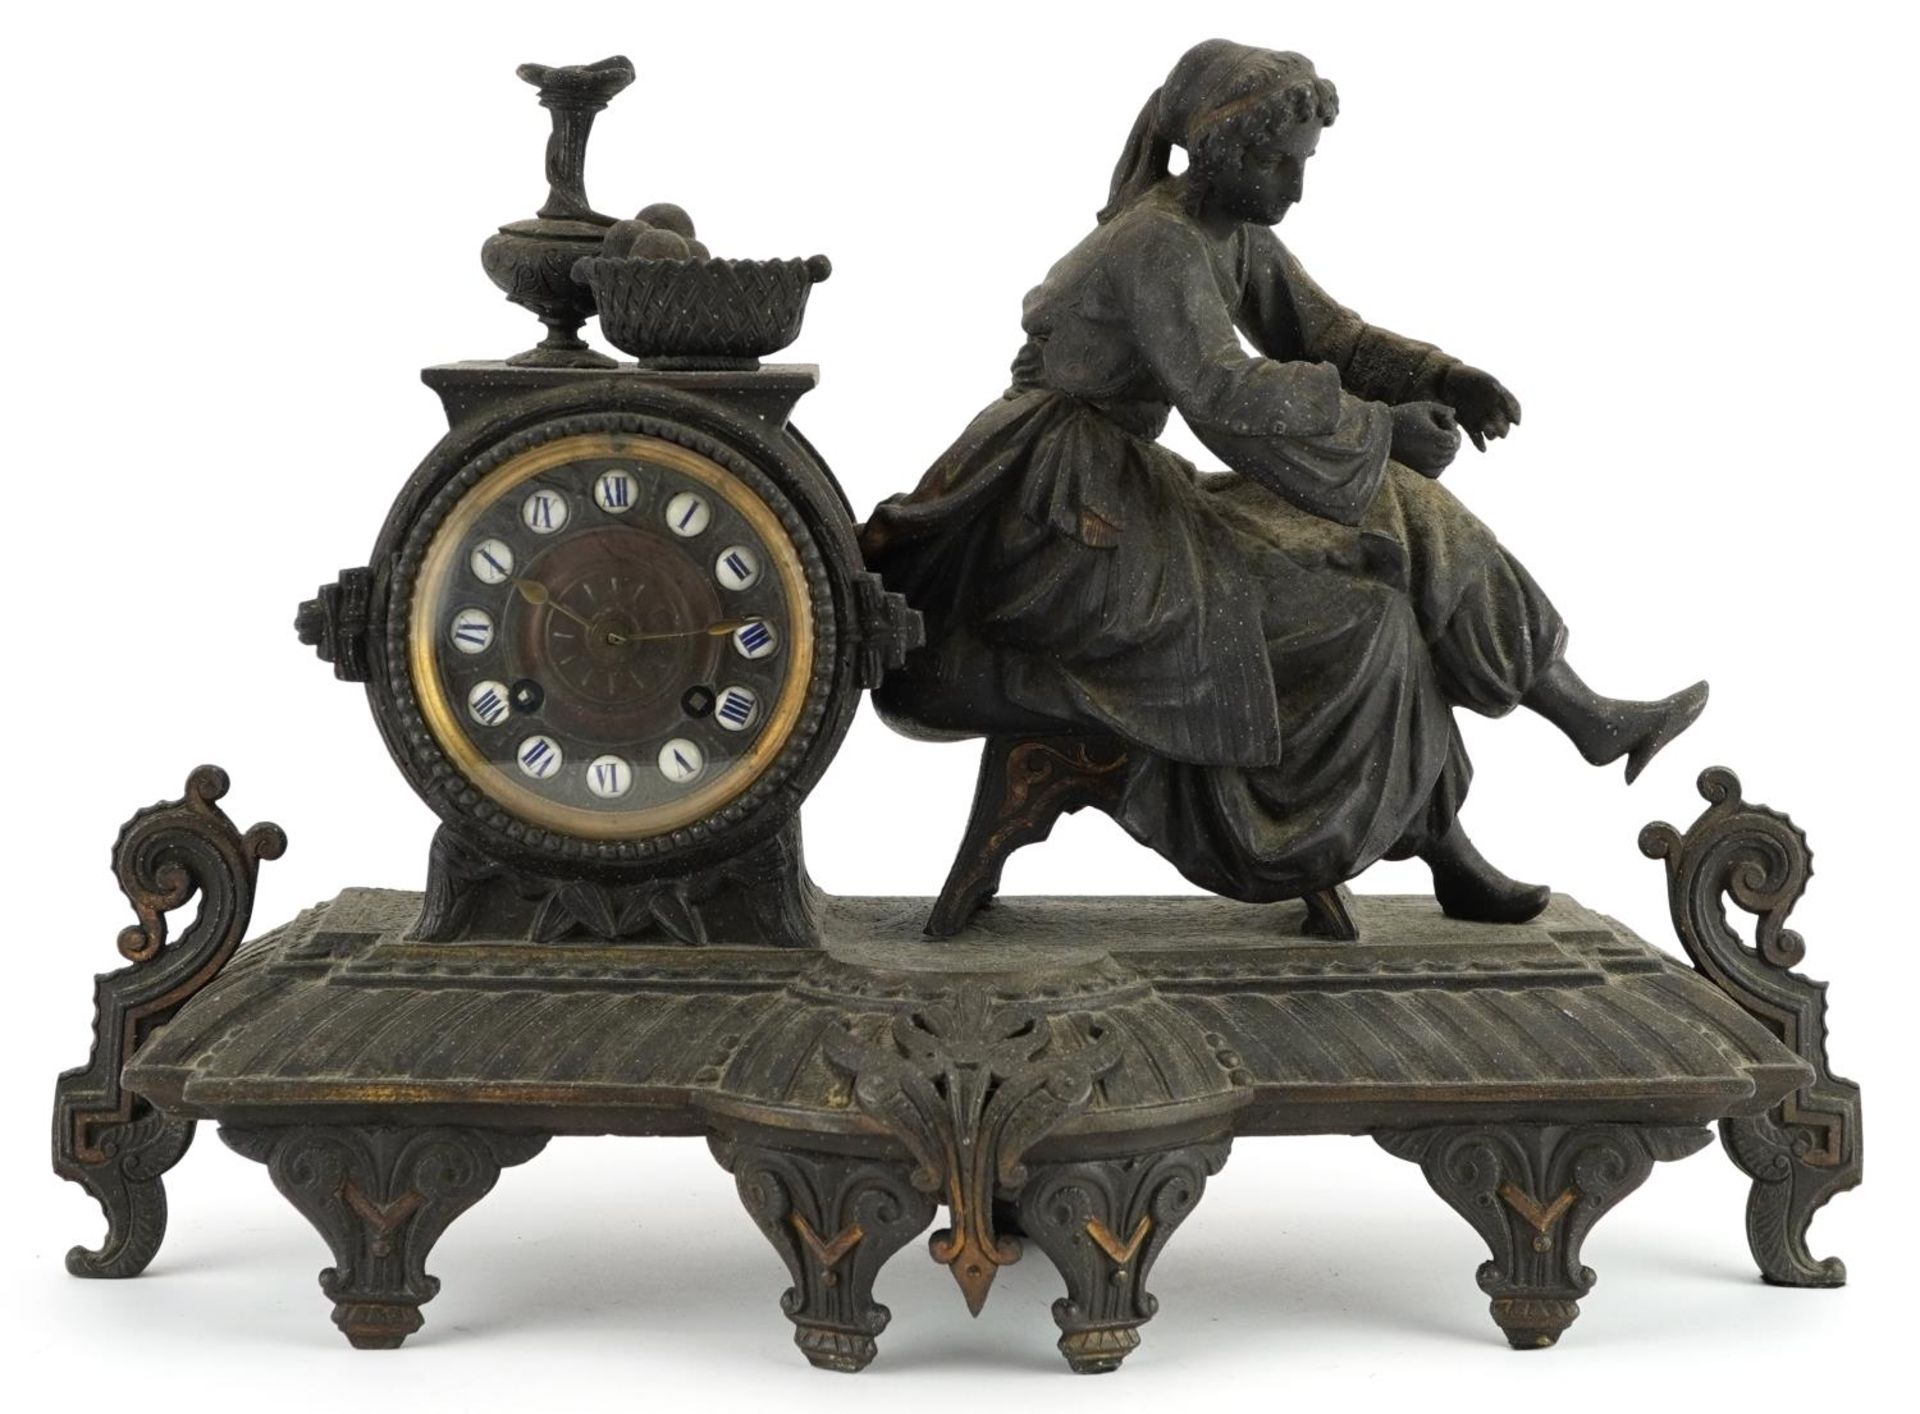 19th century partially gilt patinated spelter figural mantle clock striking on a bell with